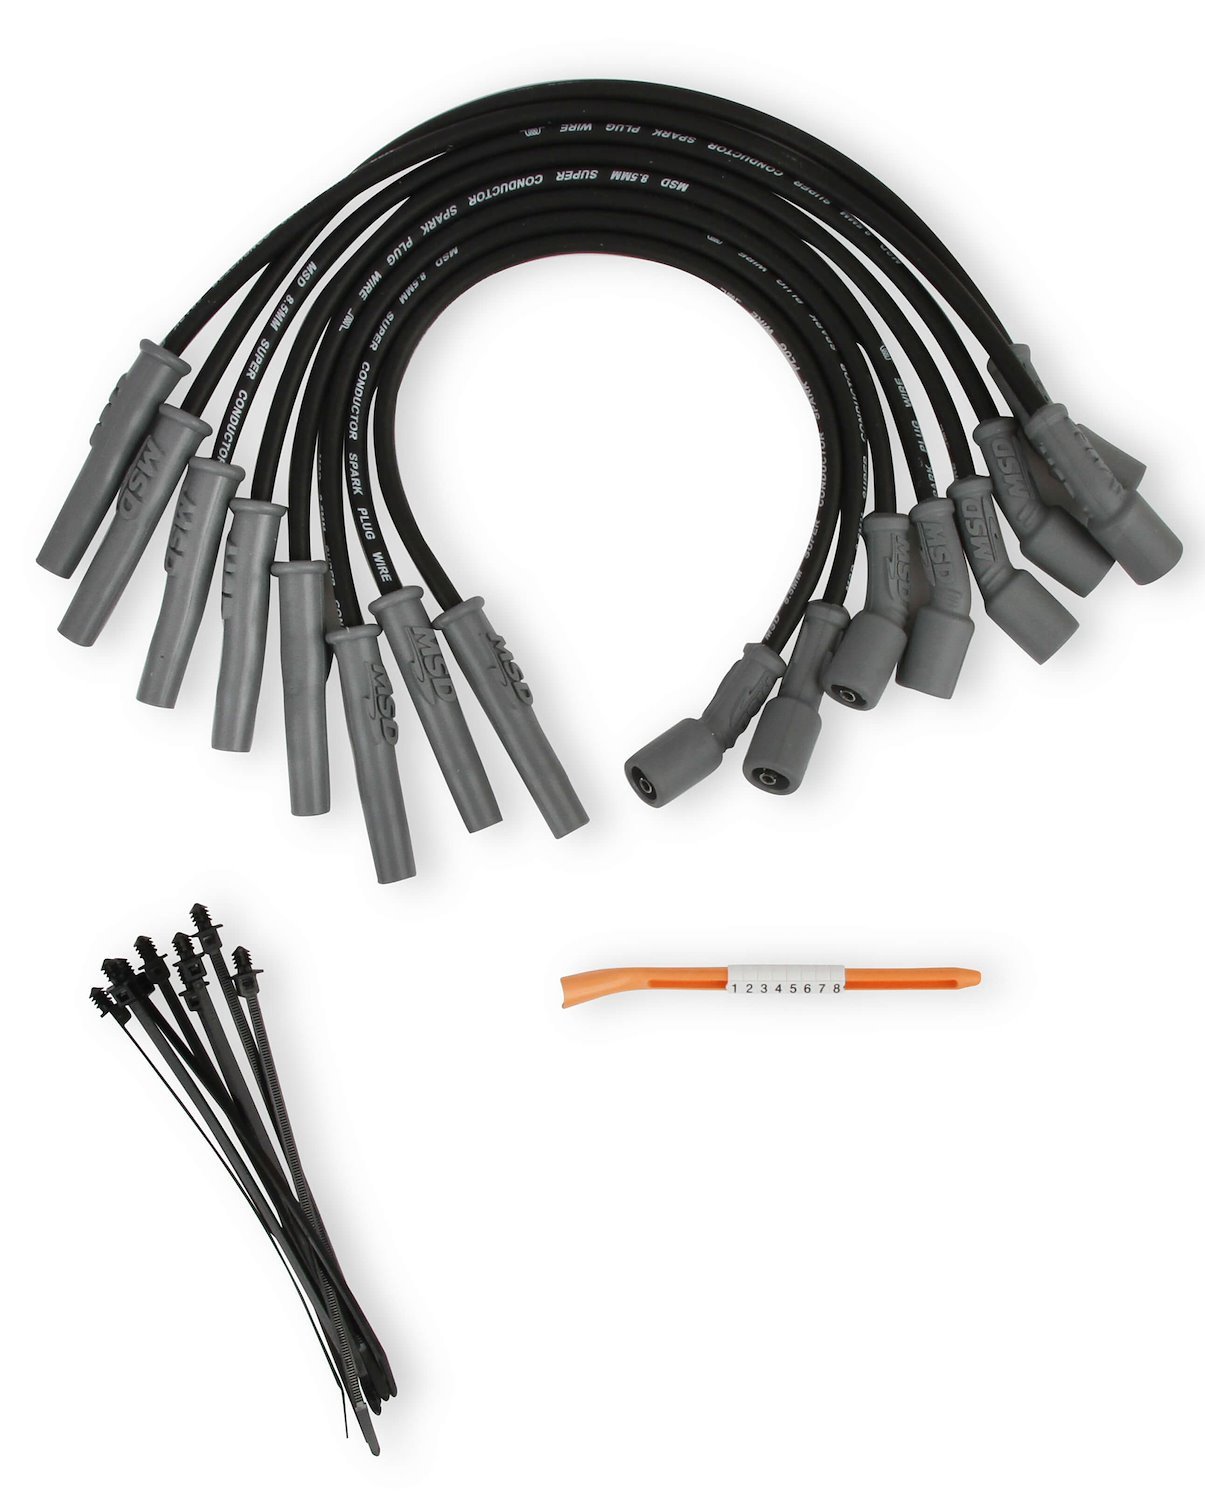 8.5mm BLACK SPRIAL CORE Universal Spark Plug Wires 90 degree Boots POINTS femal